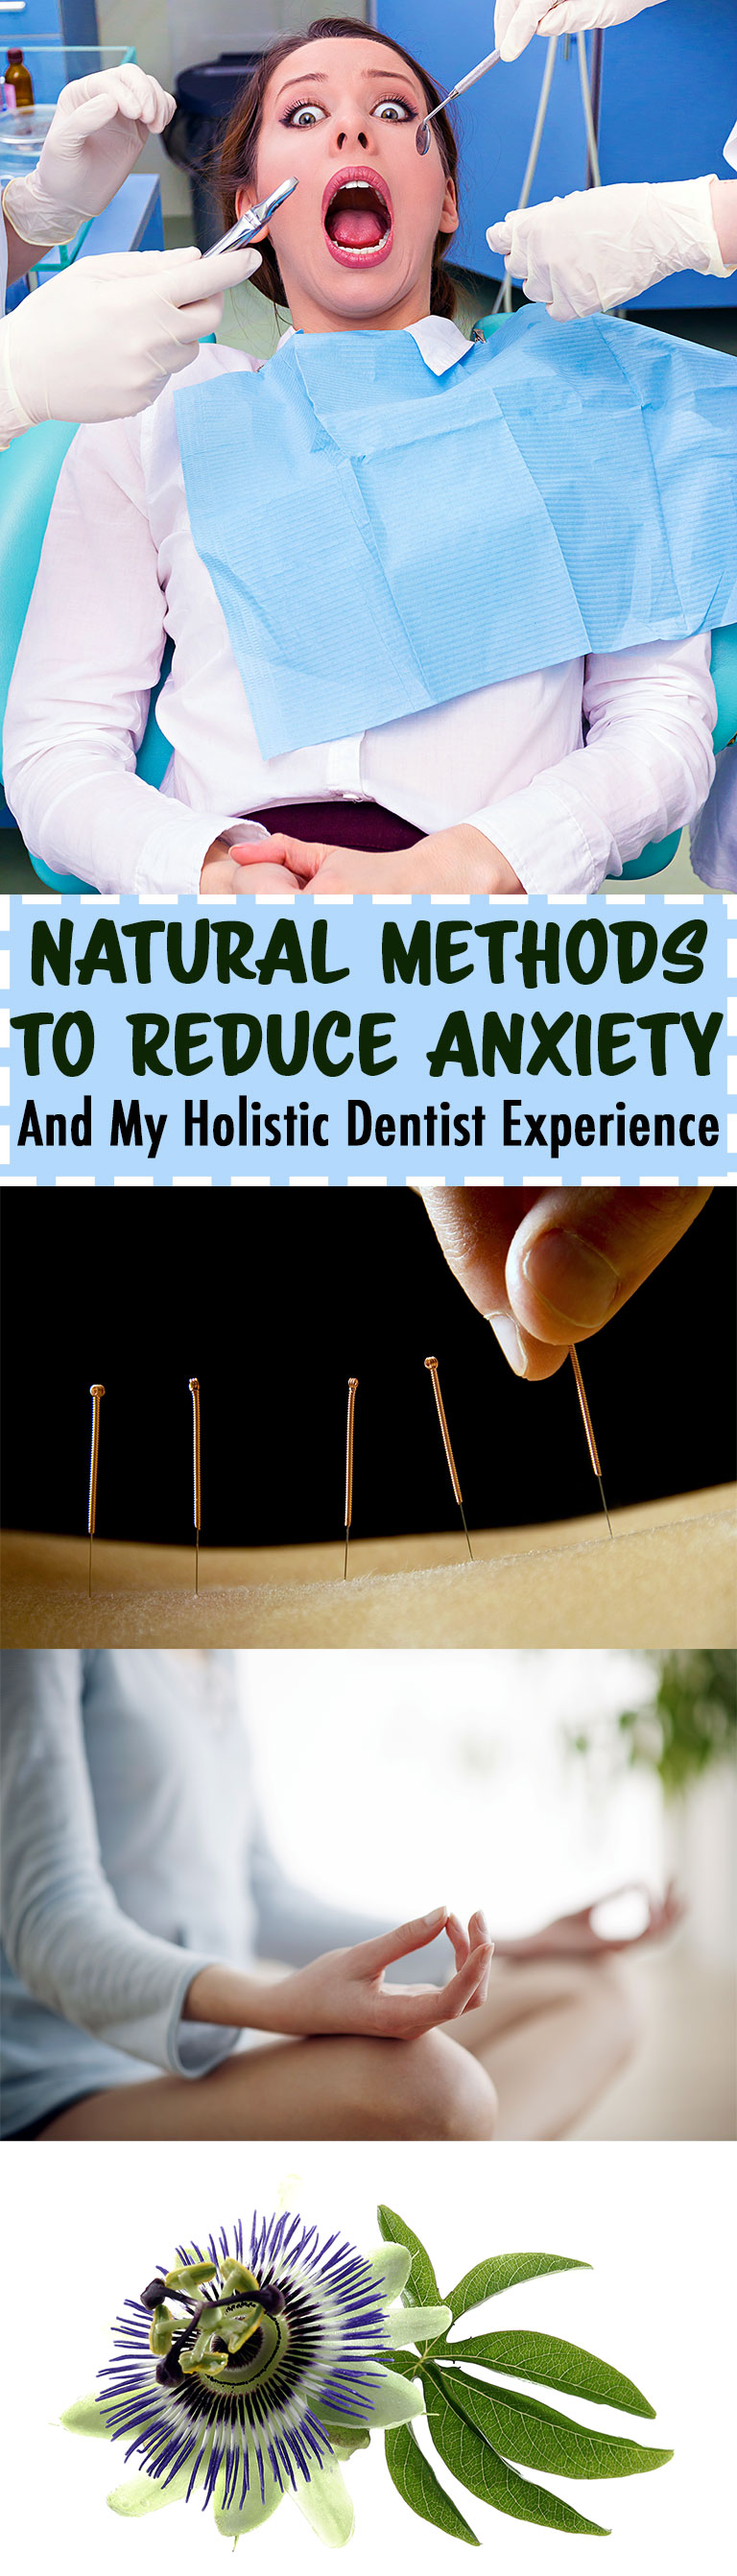 Natural Methods to Reduce Anxiety + My Holistic Dentist Experience // TheCuriousCoconut.com